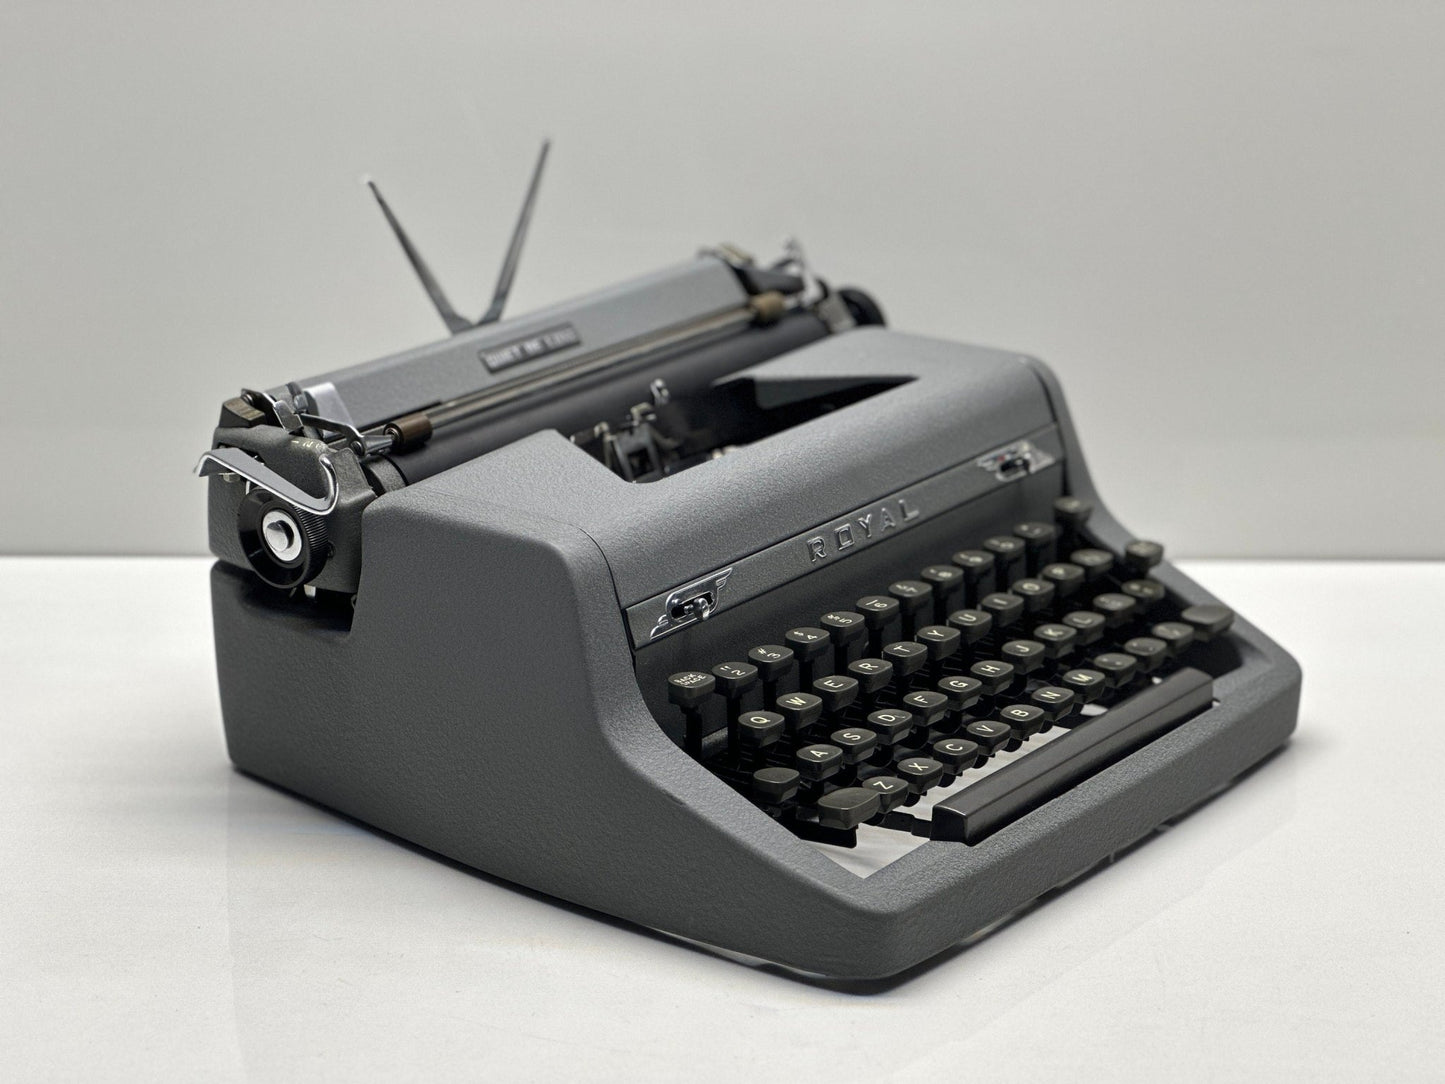 Best Gift,Royal Typewriter - QWERTY Keyboard, Gray Color, Retro Portable Case, Flawless Operation